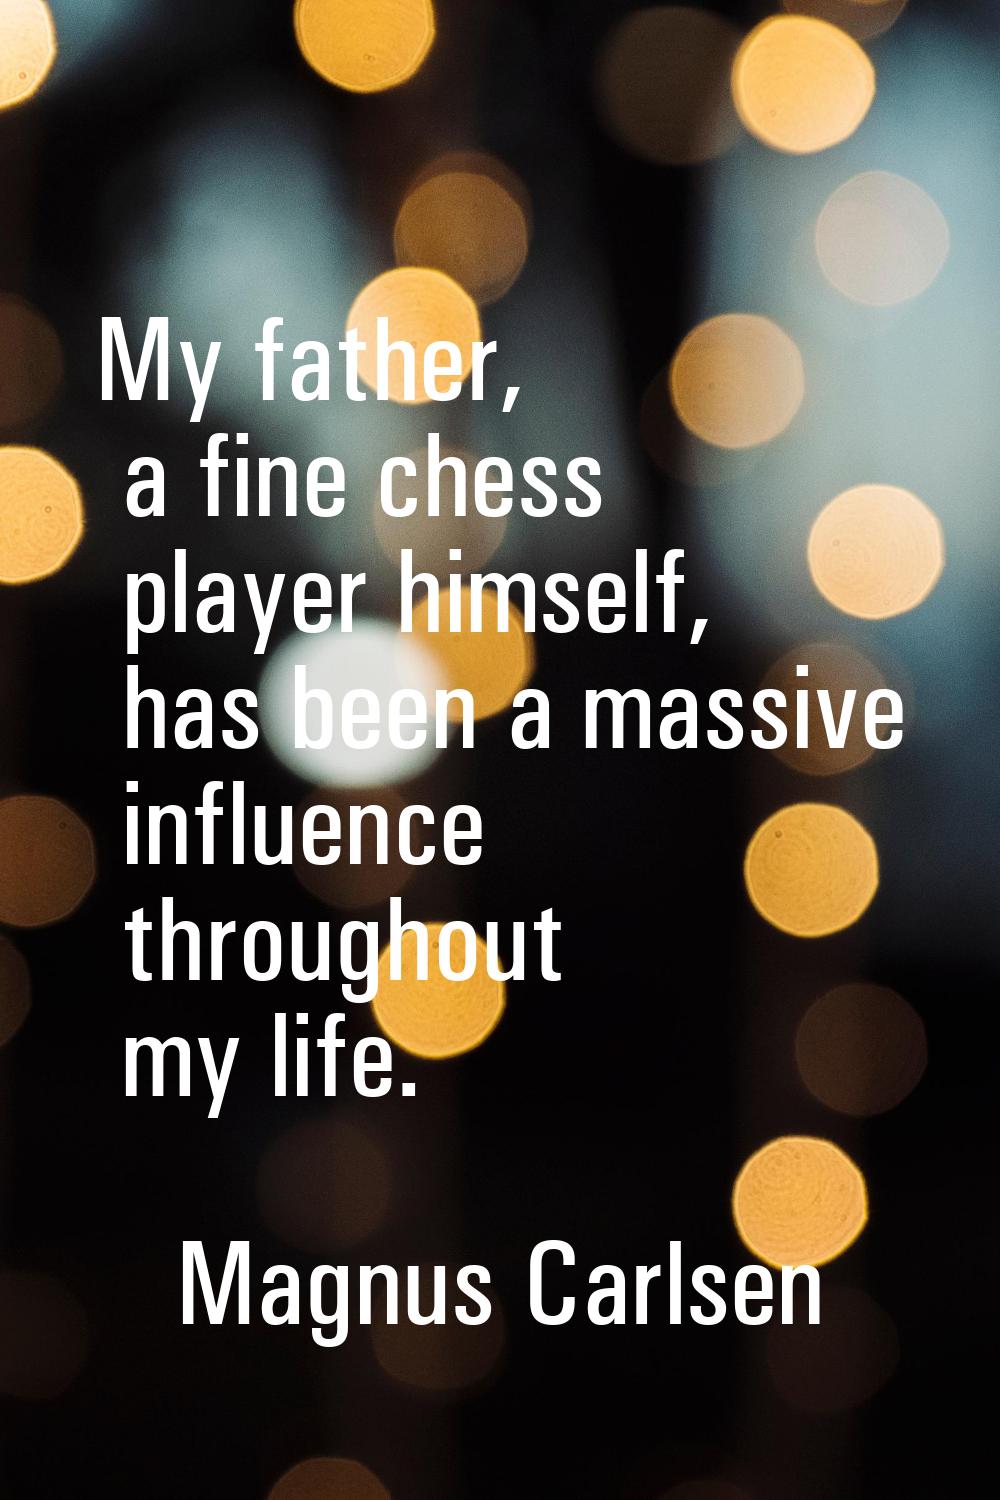 My father, a fine chess player himself, has been a massive influence throughout my life.